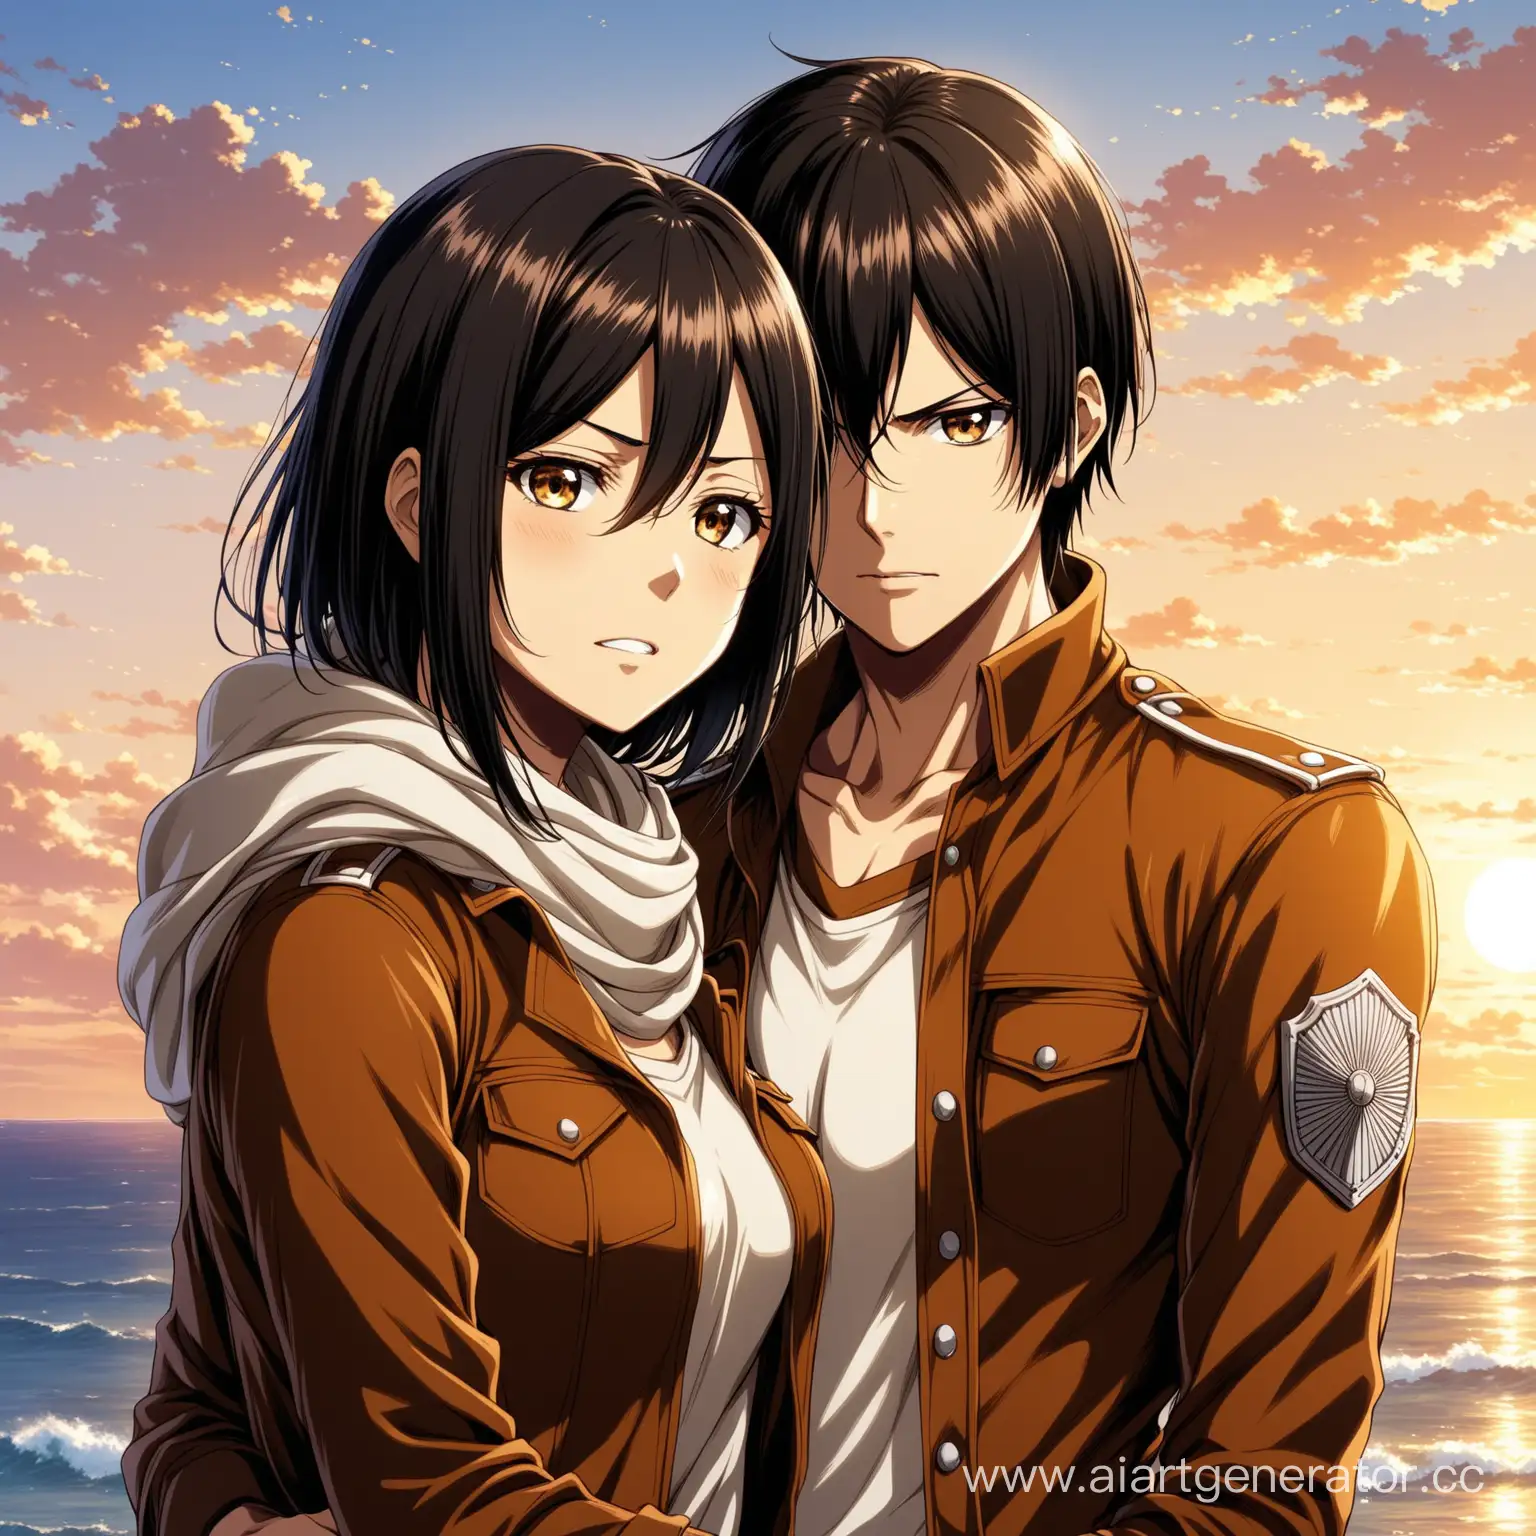 Mikasa-and-Eren-Yeager-in-Intense-Battle